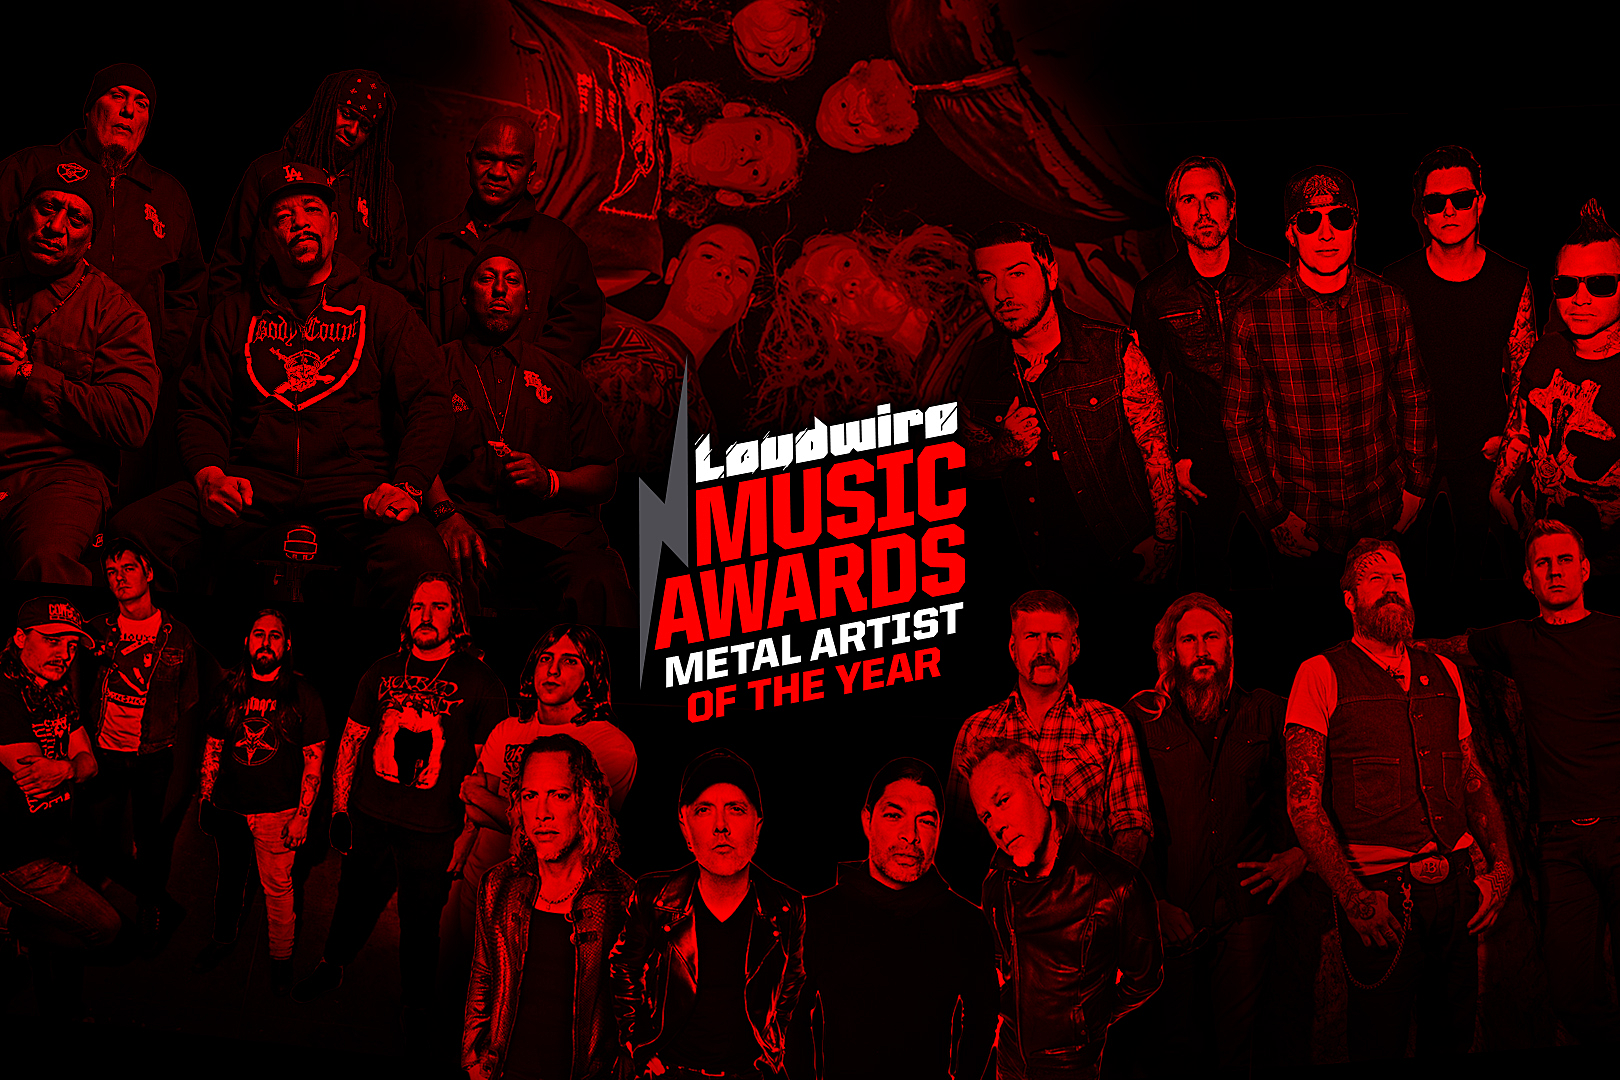 Vote for the Metal Artist of the Year – 2017 Loudwire Music Awards